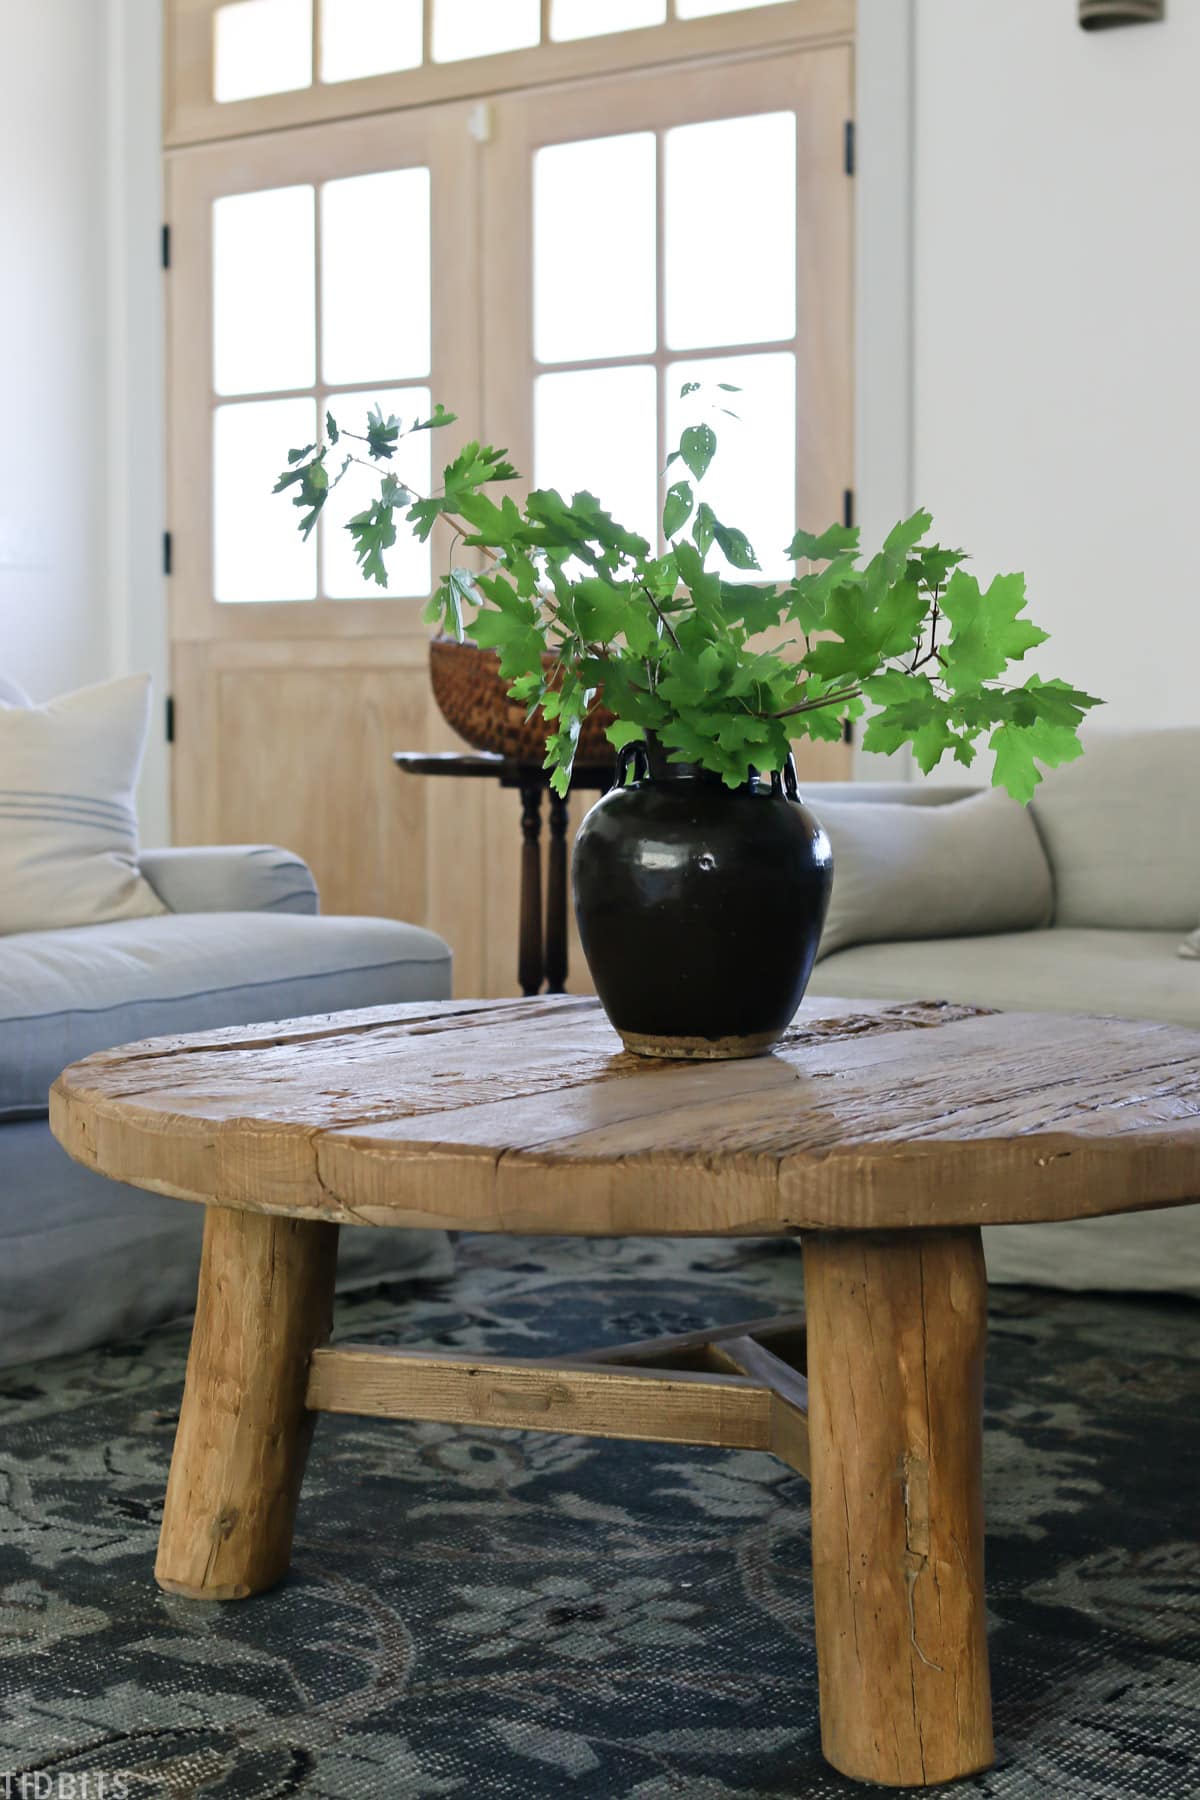 How To Style A Round Coffee Table 3, How To Style A Small Round Coffee Table